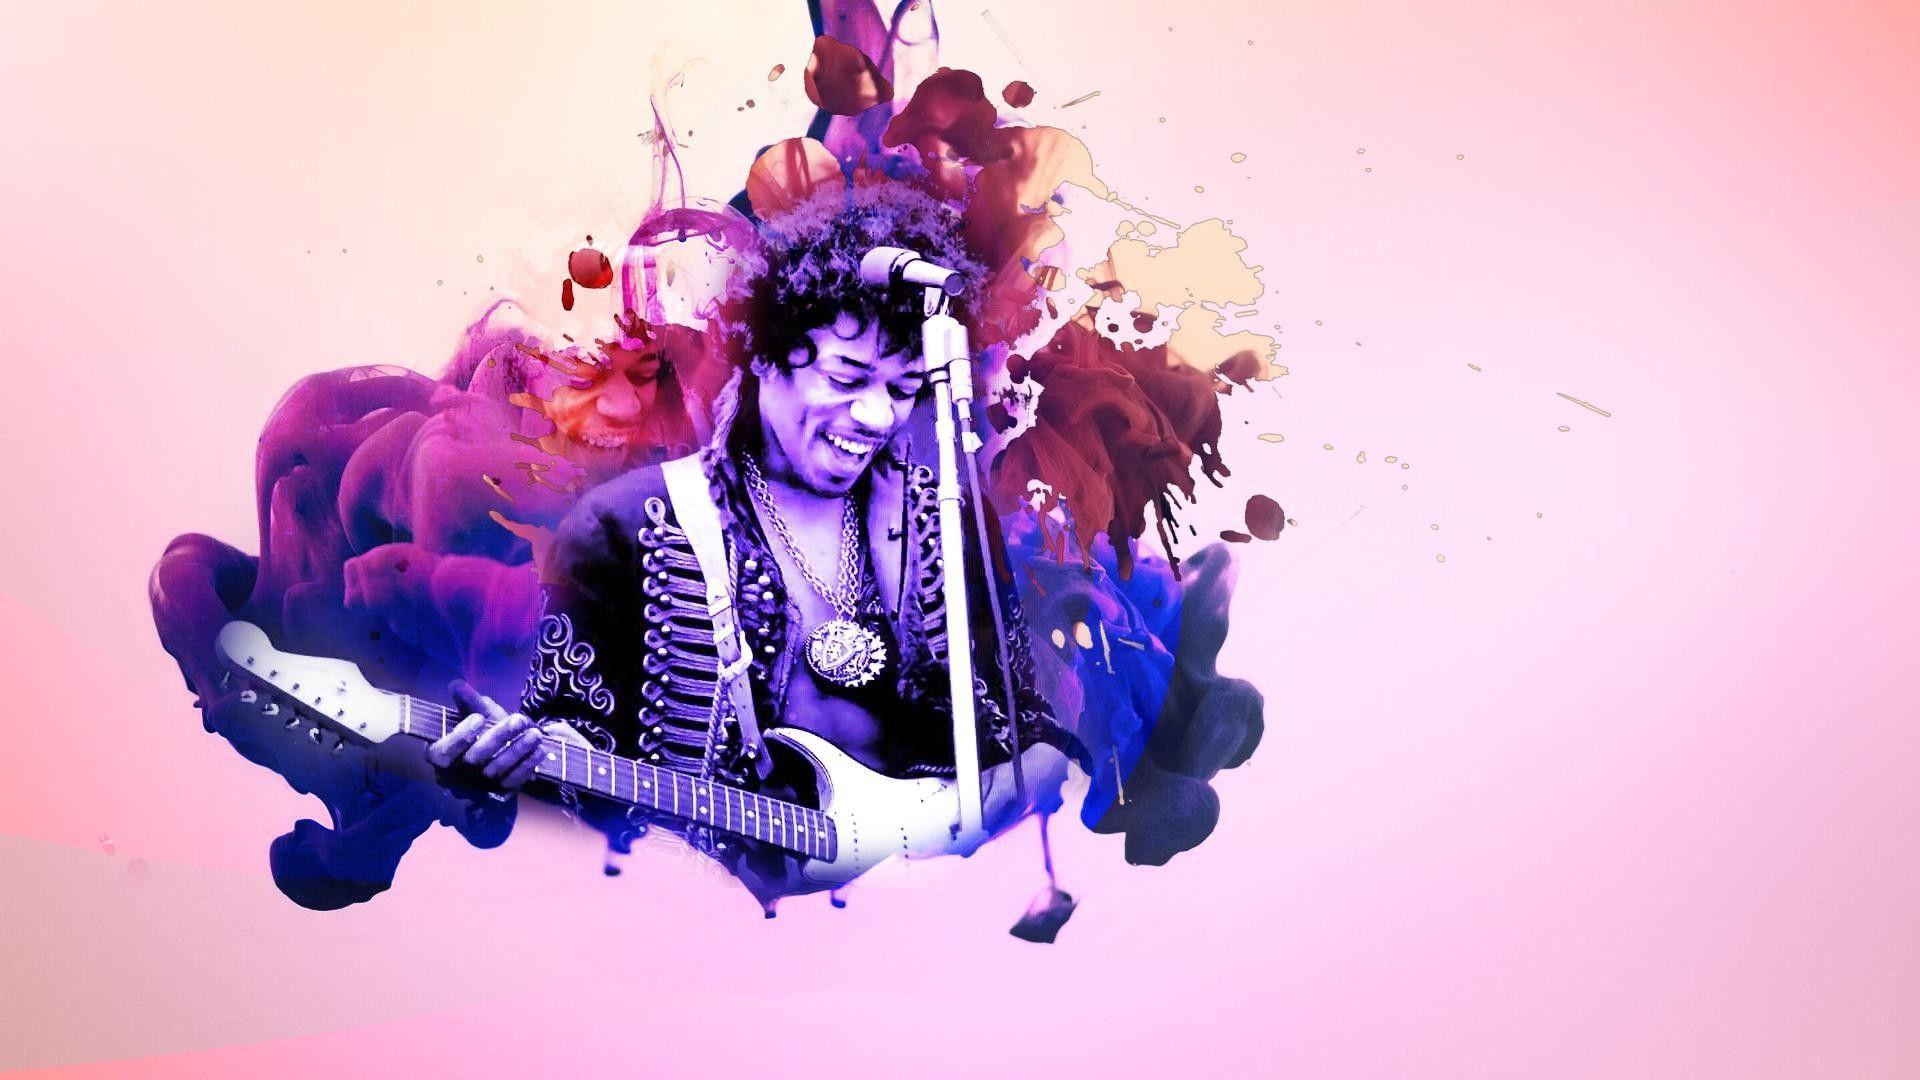 Singer Jimi Hendrix wallpaper and image, picture